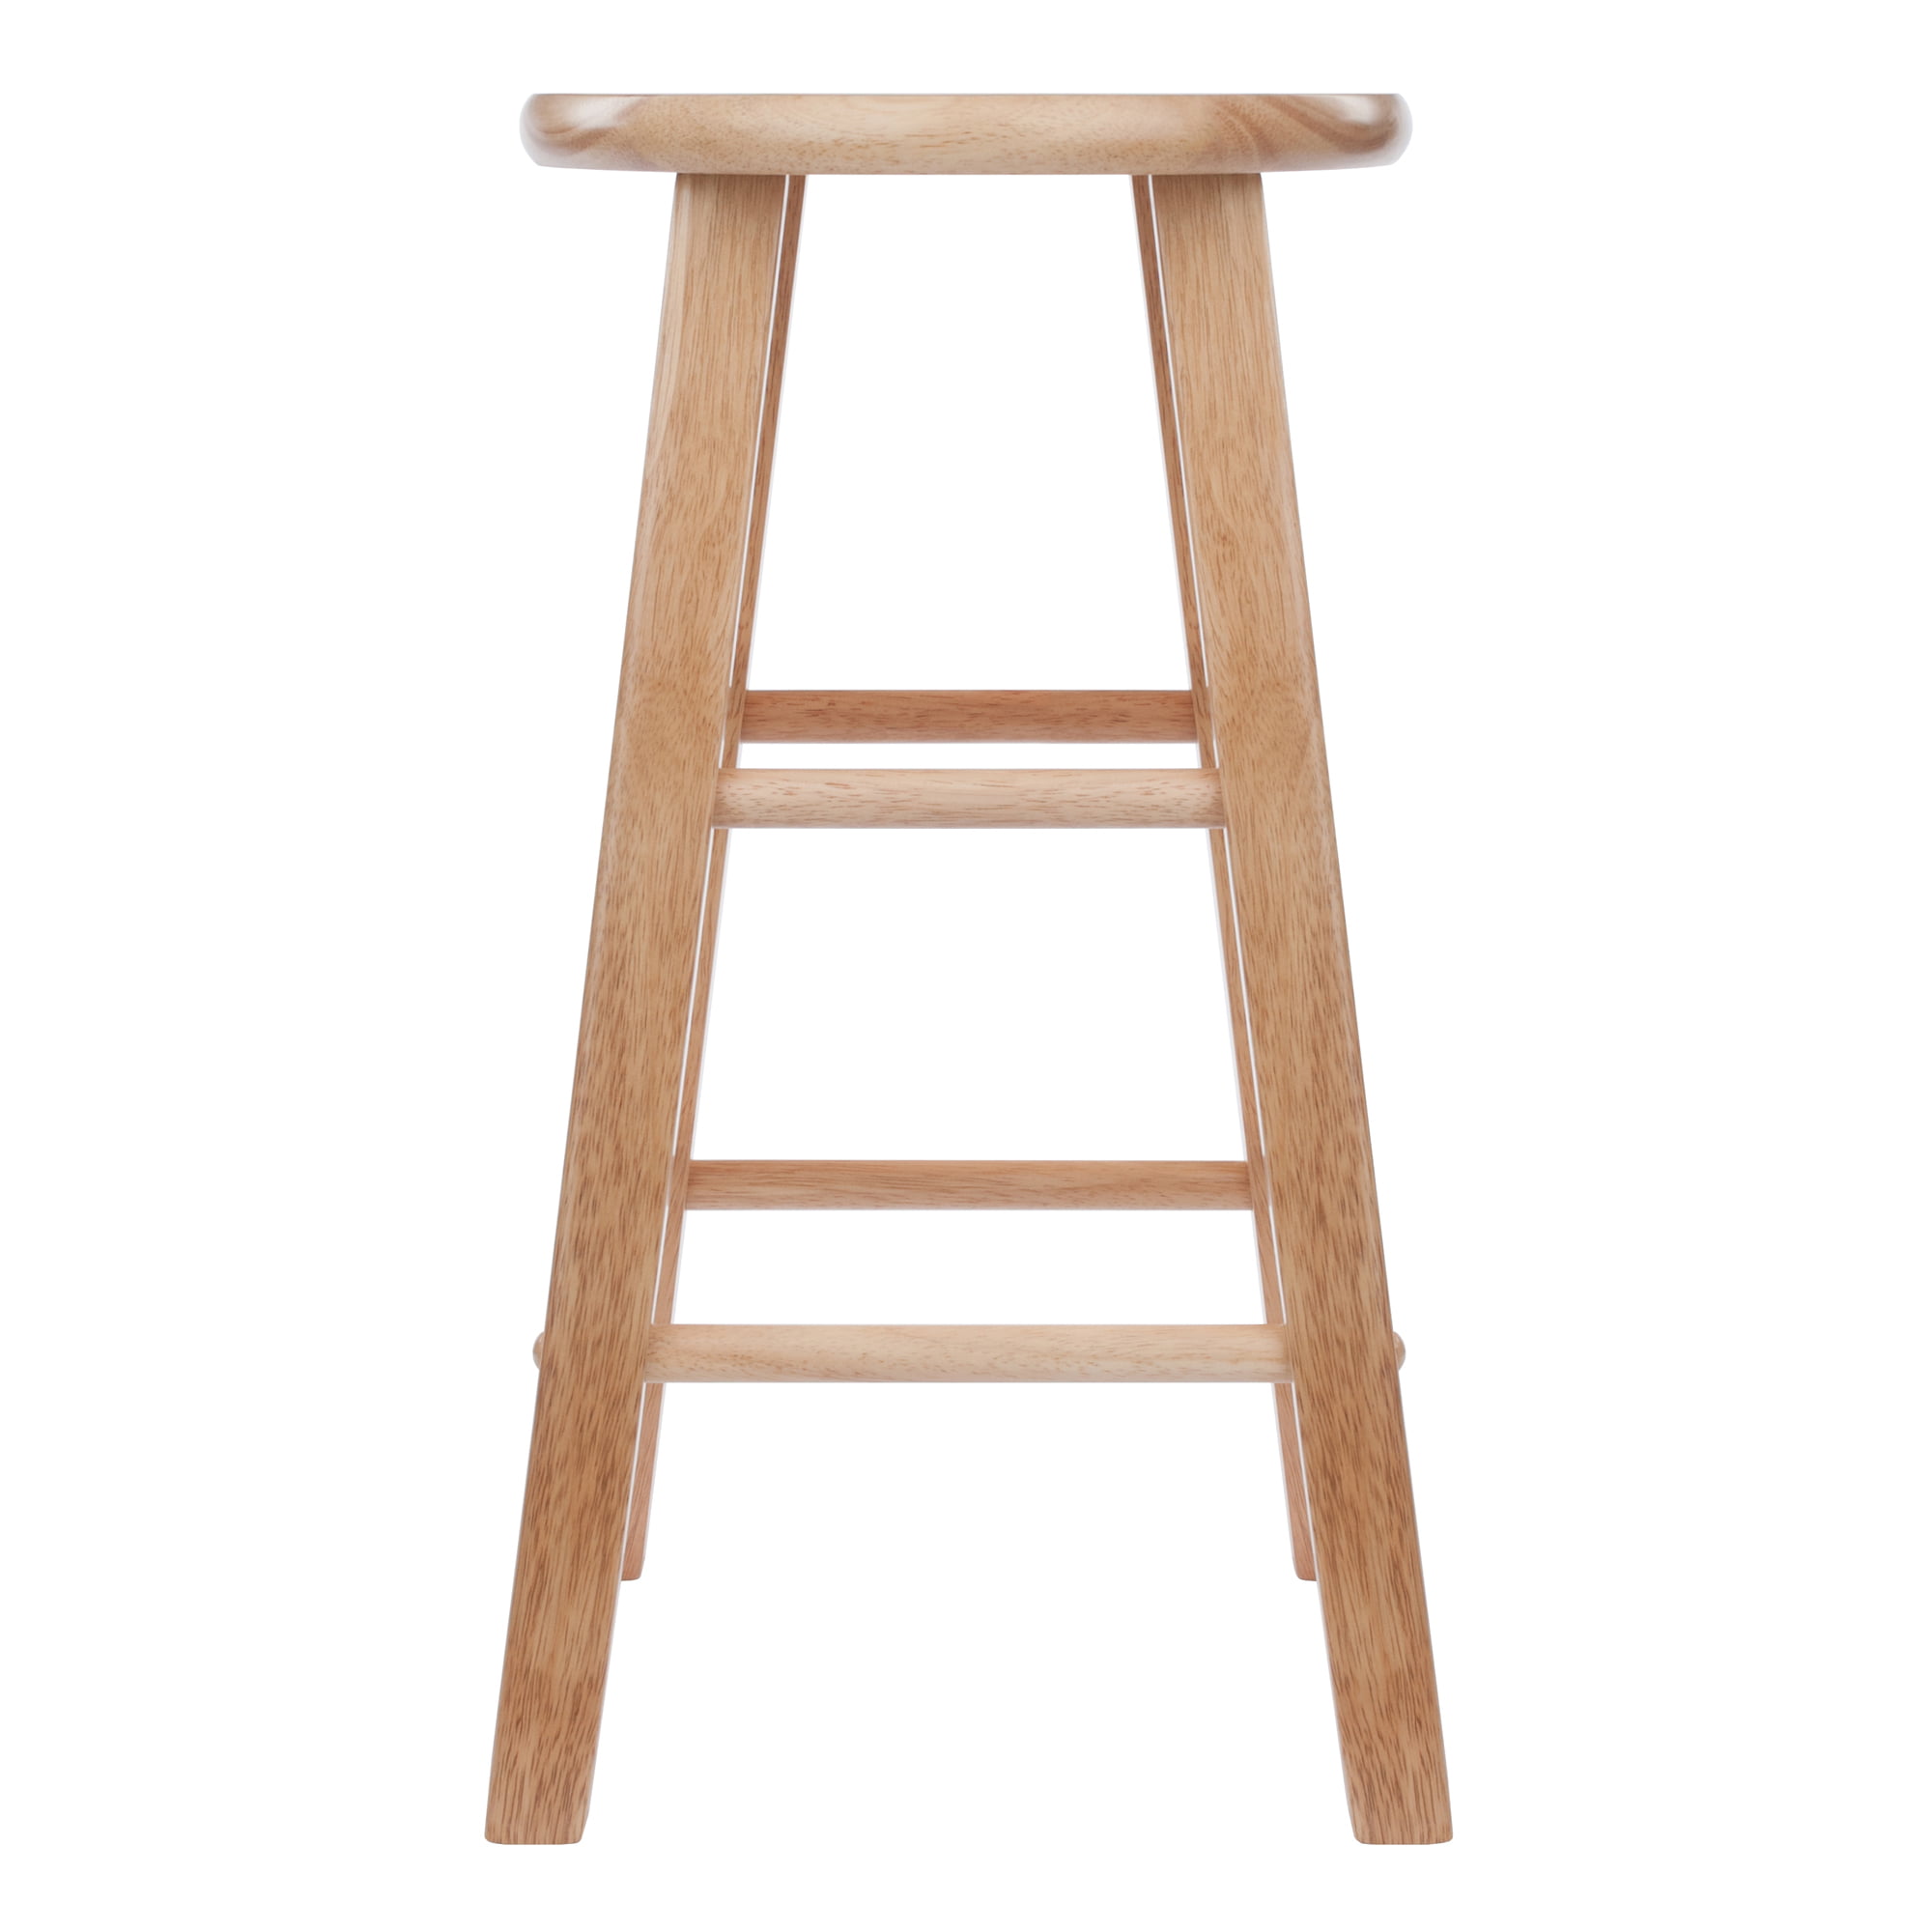 Winsome Wood Element 2-Piece Counter Stools, Natural Finish - image 5 of 8